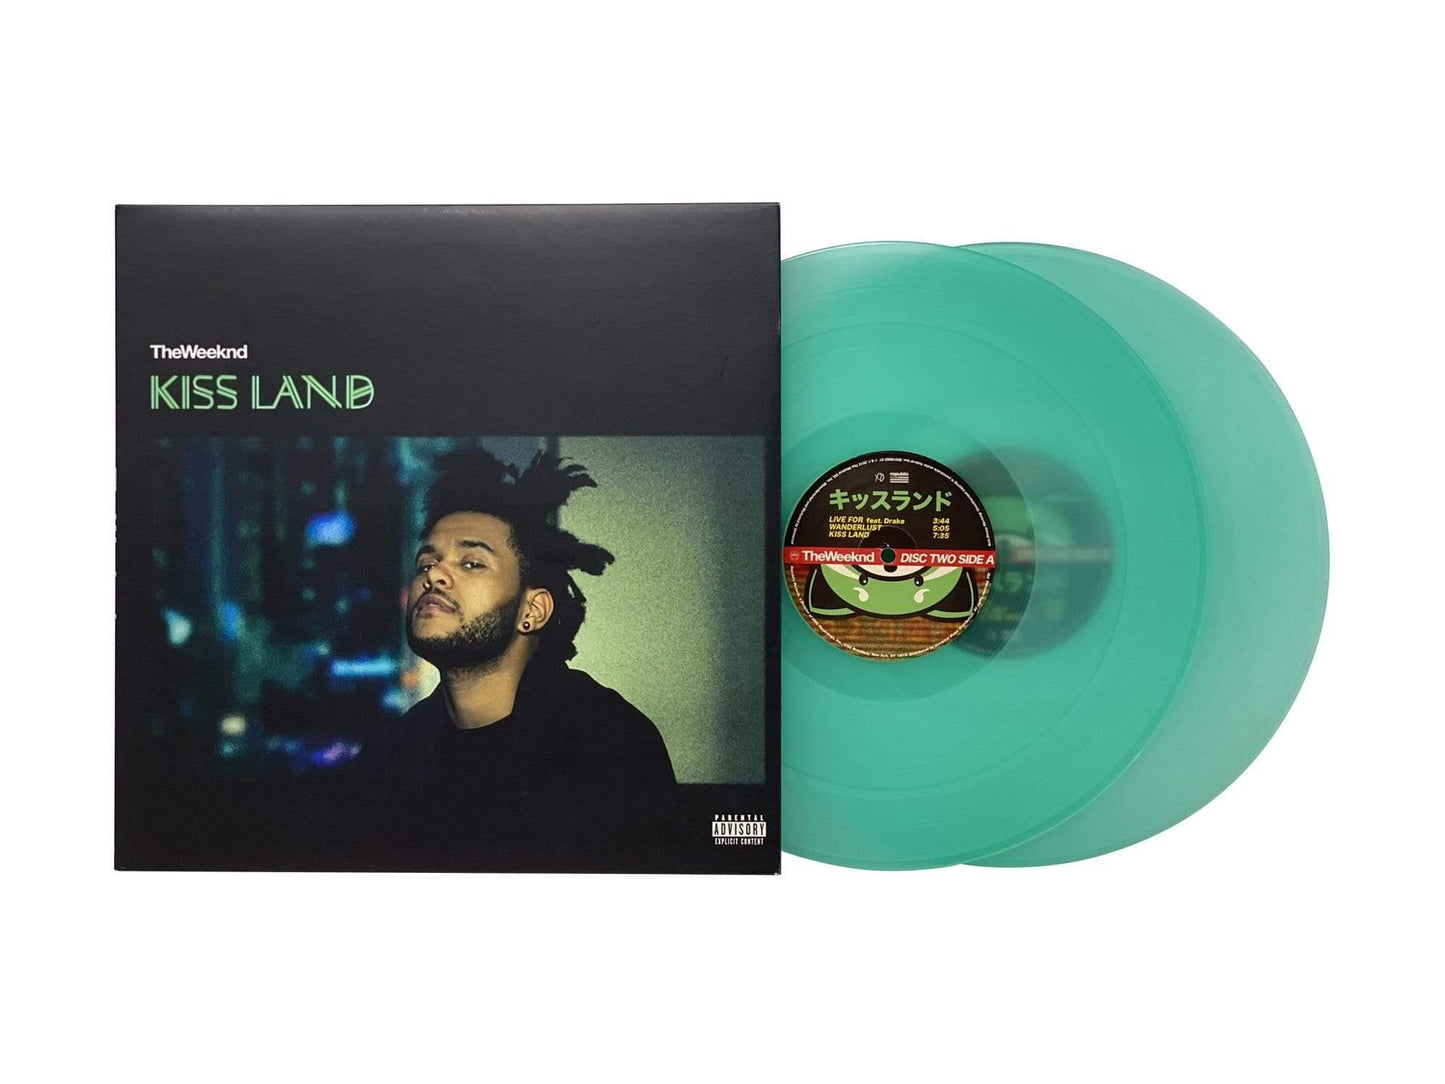 The Weeknd - Kiss Land (Limited Anniversary Edition, Gatefold, 180 Gram, Sea Glass Color) (2 LP) - Joco Records